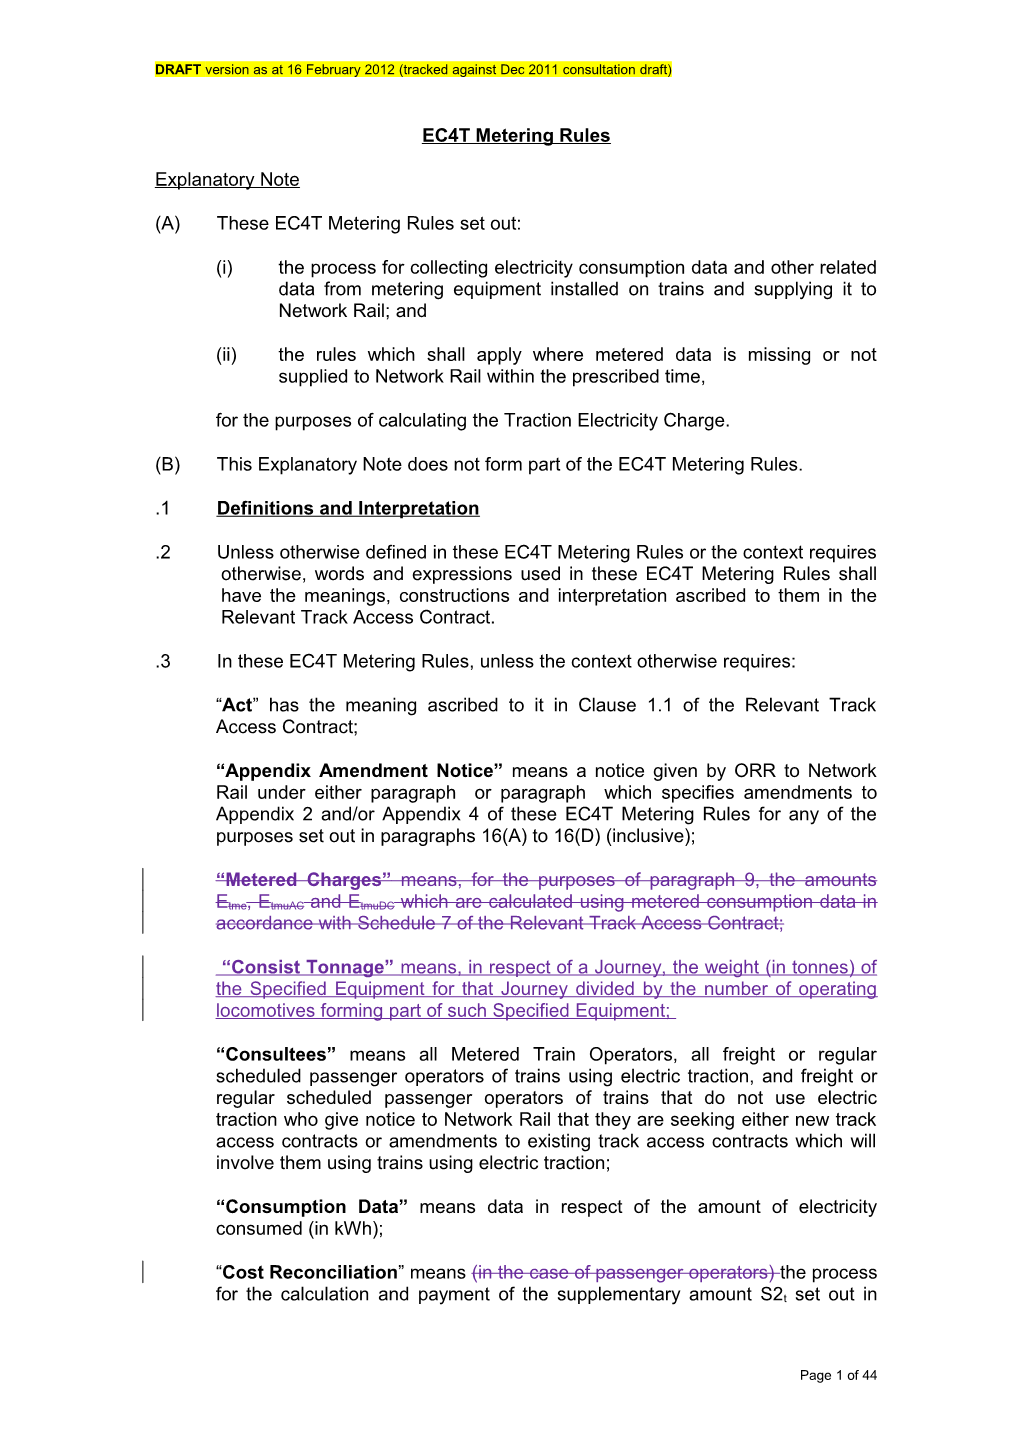 EC4T Metering Rules - Tracked Against Consultation Draft (16 Feb 2012)